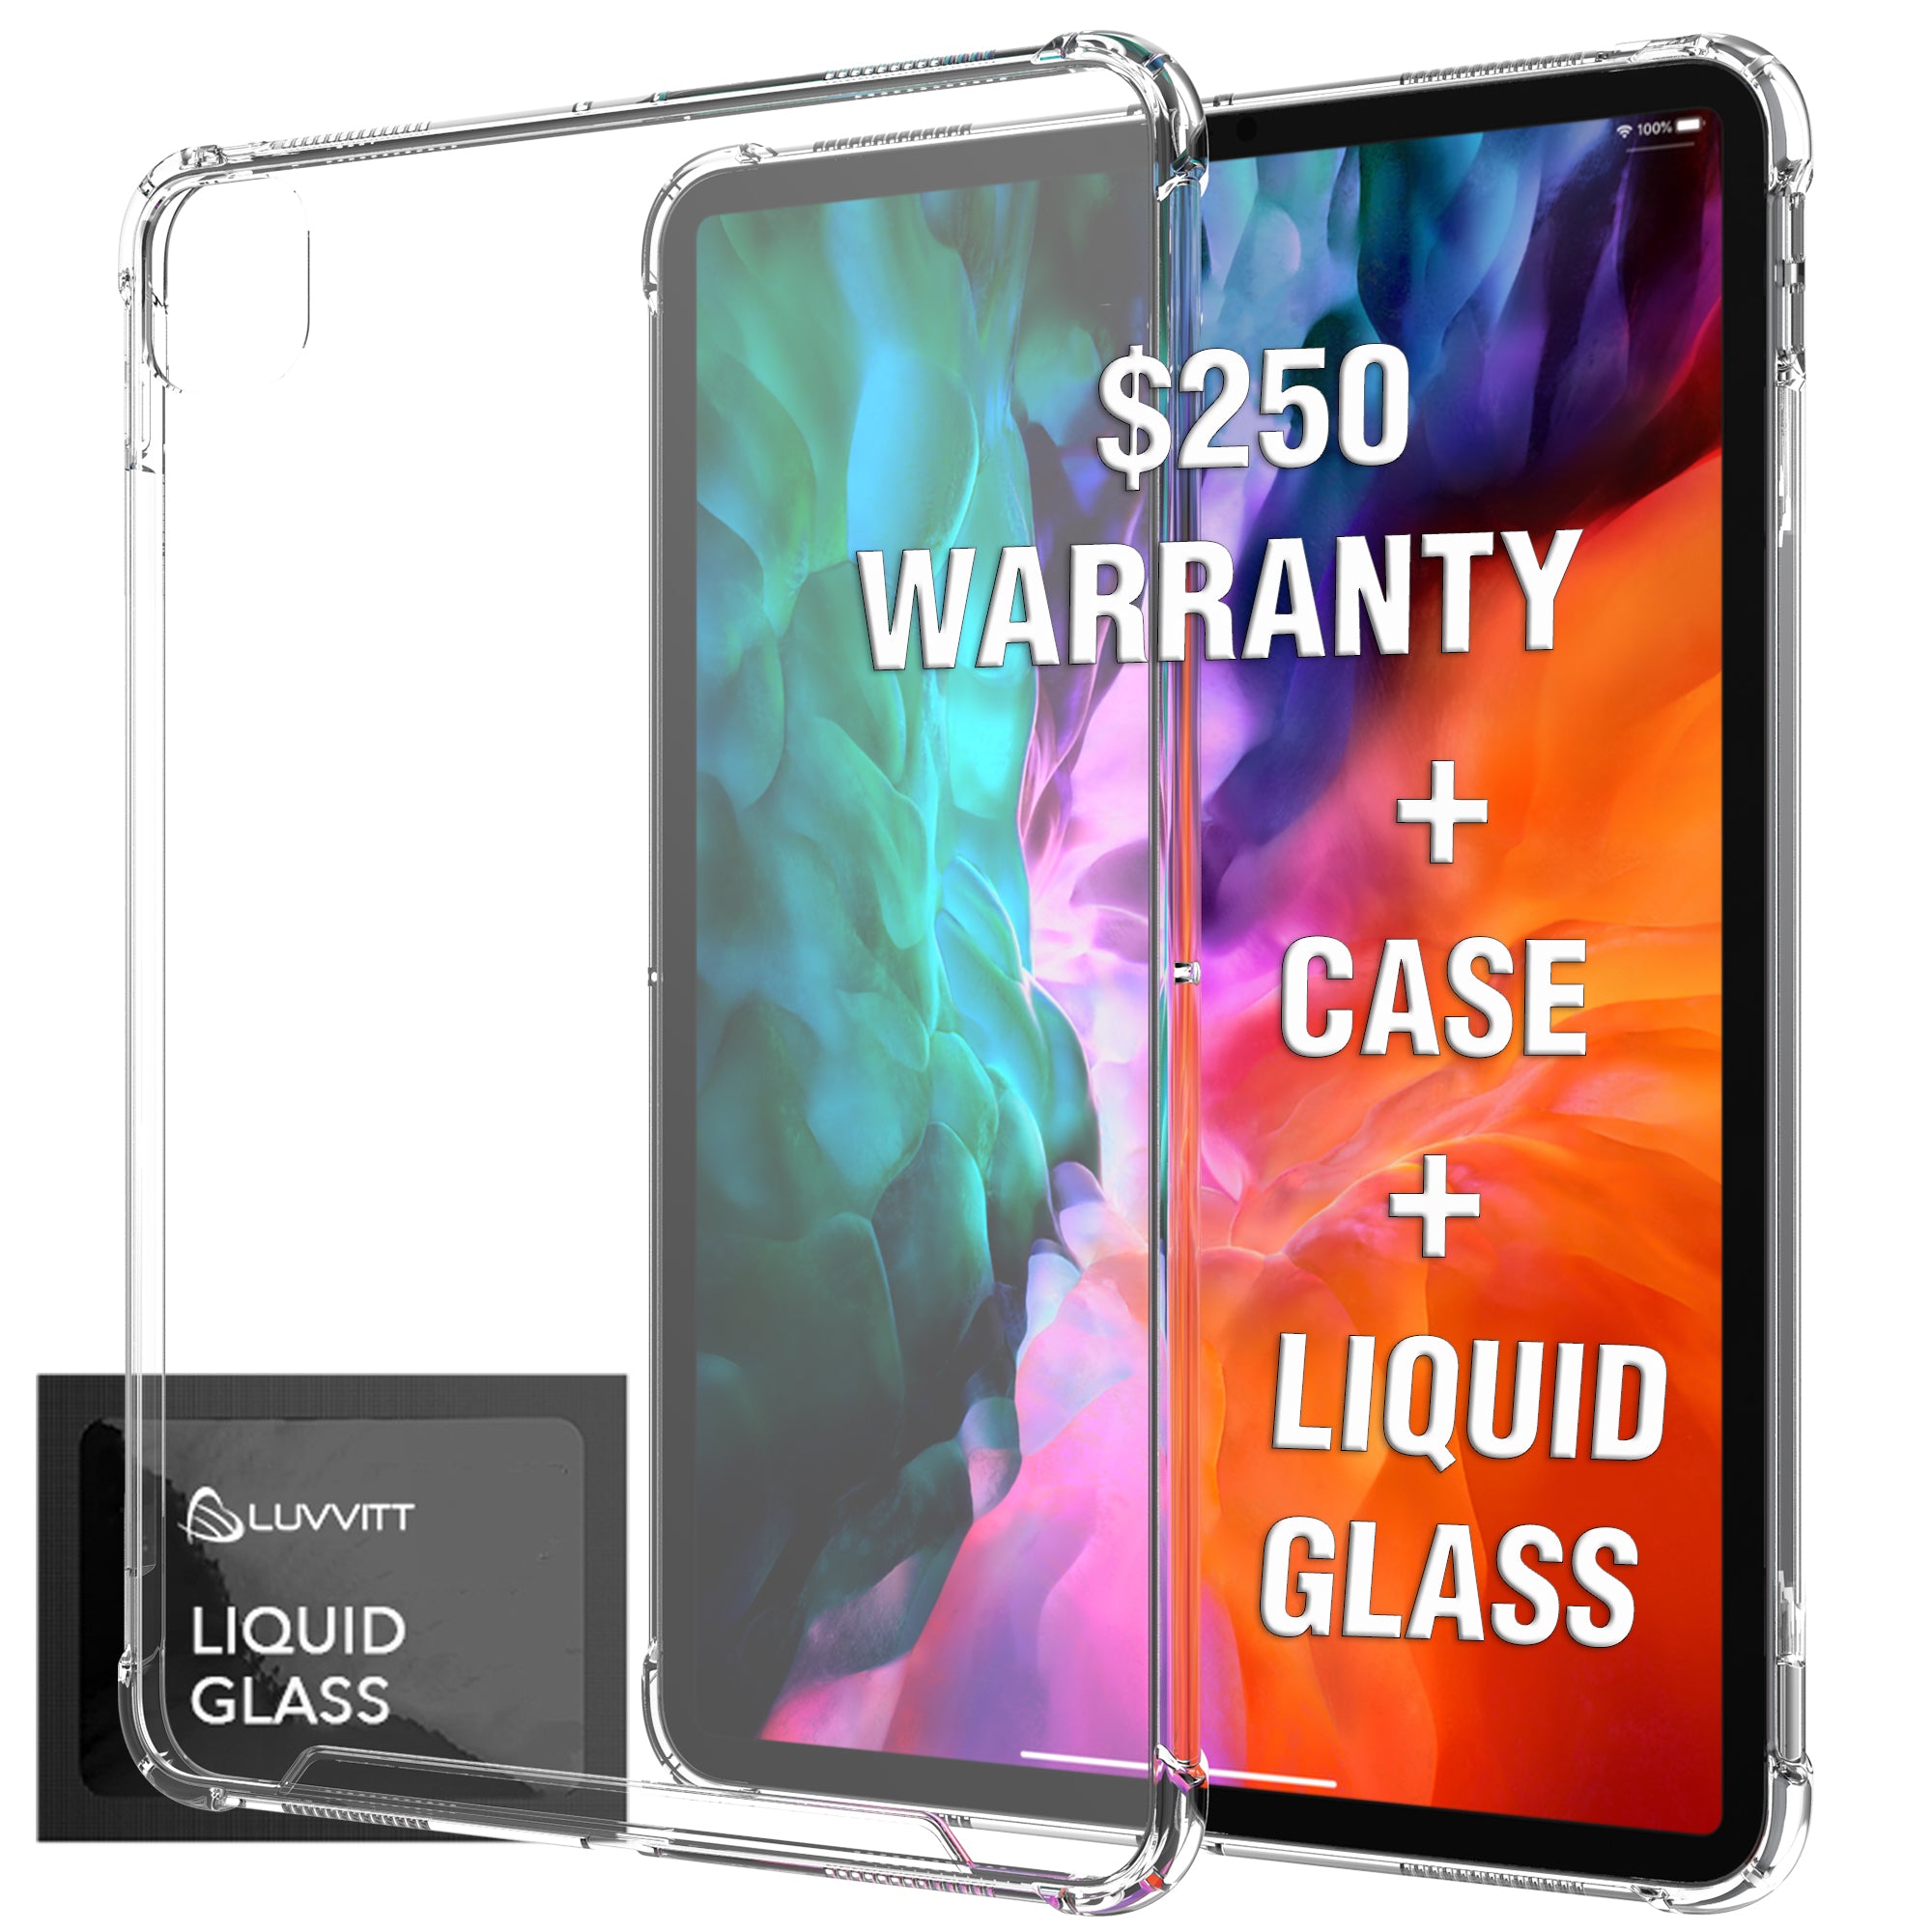 iPad Pro 11 2020 Case with $250 Warranty - Luvvitt Clear View Case and Liquid Glass Screen Protector